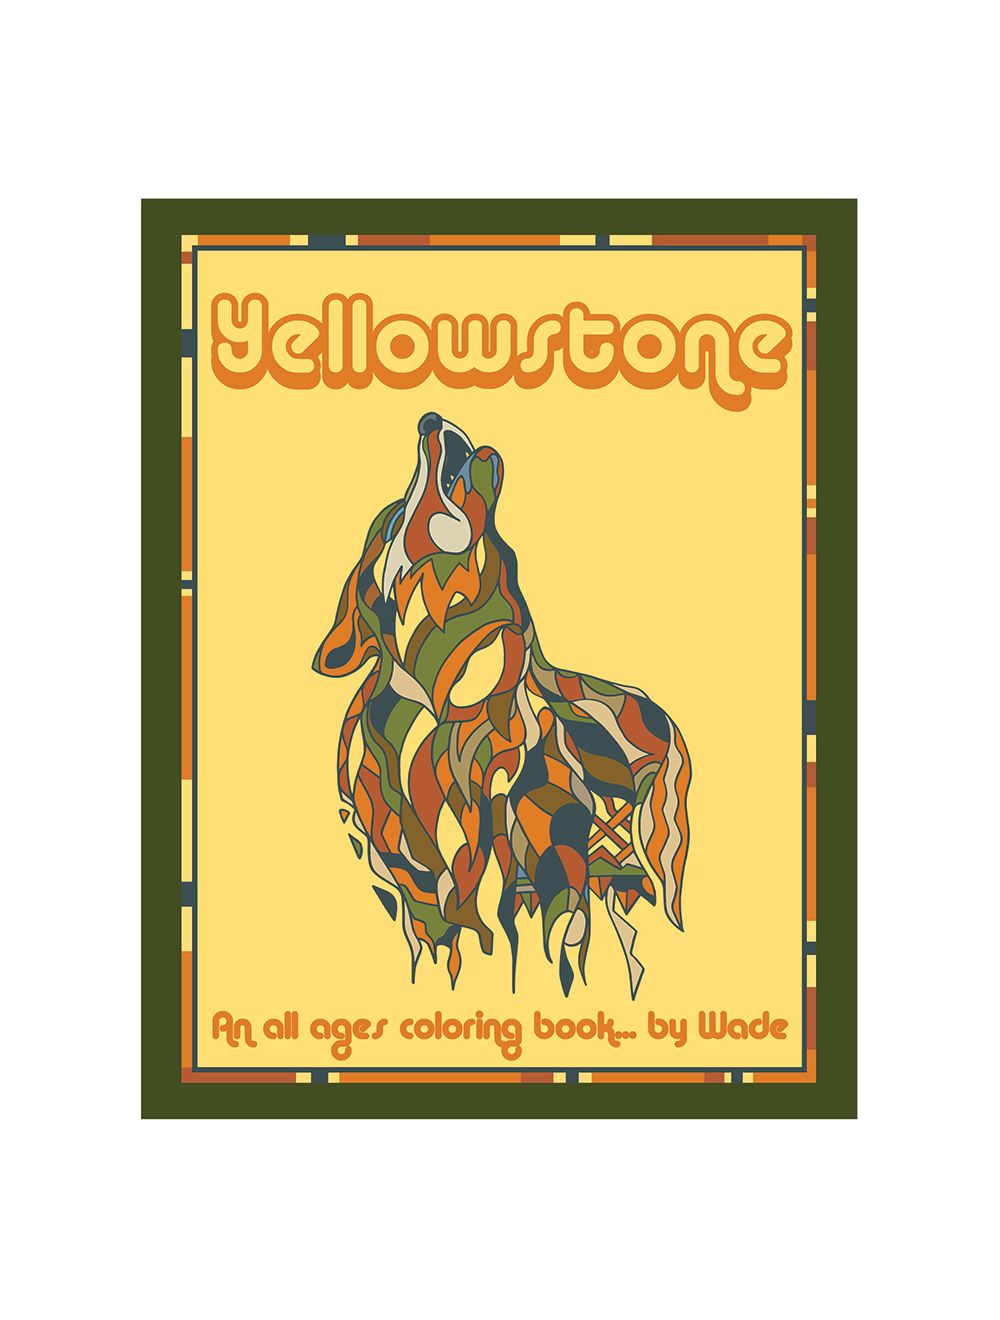 Yellowstone national park lodges yellowstone adult coloring book by wade johnson